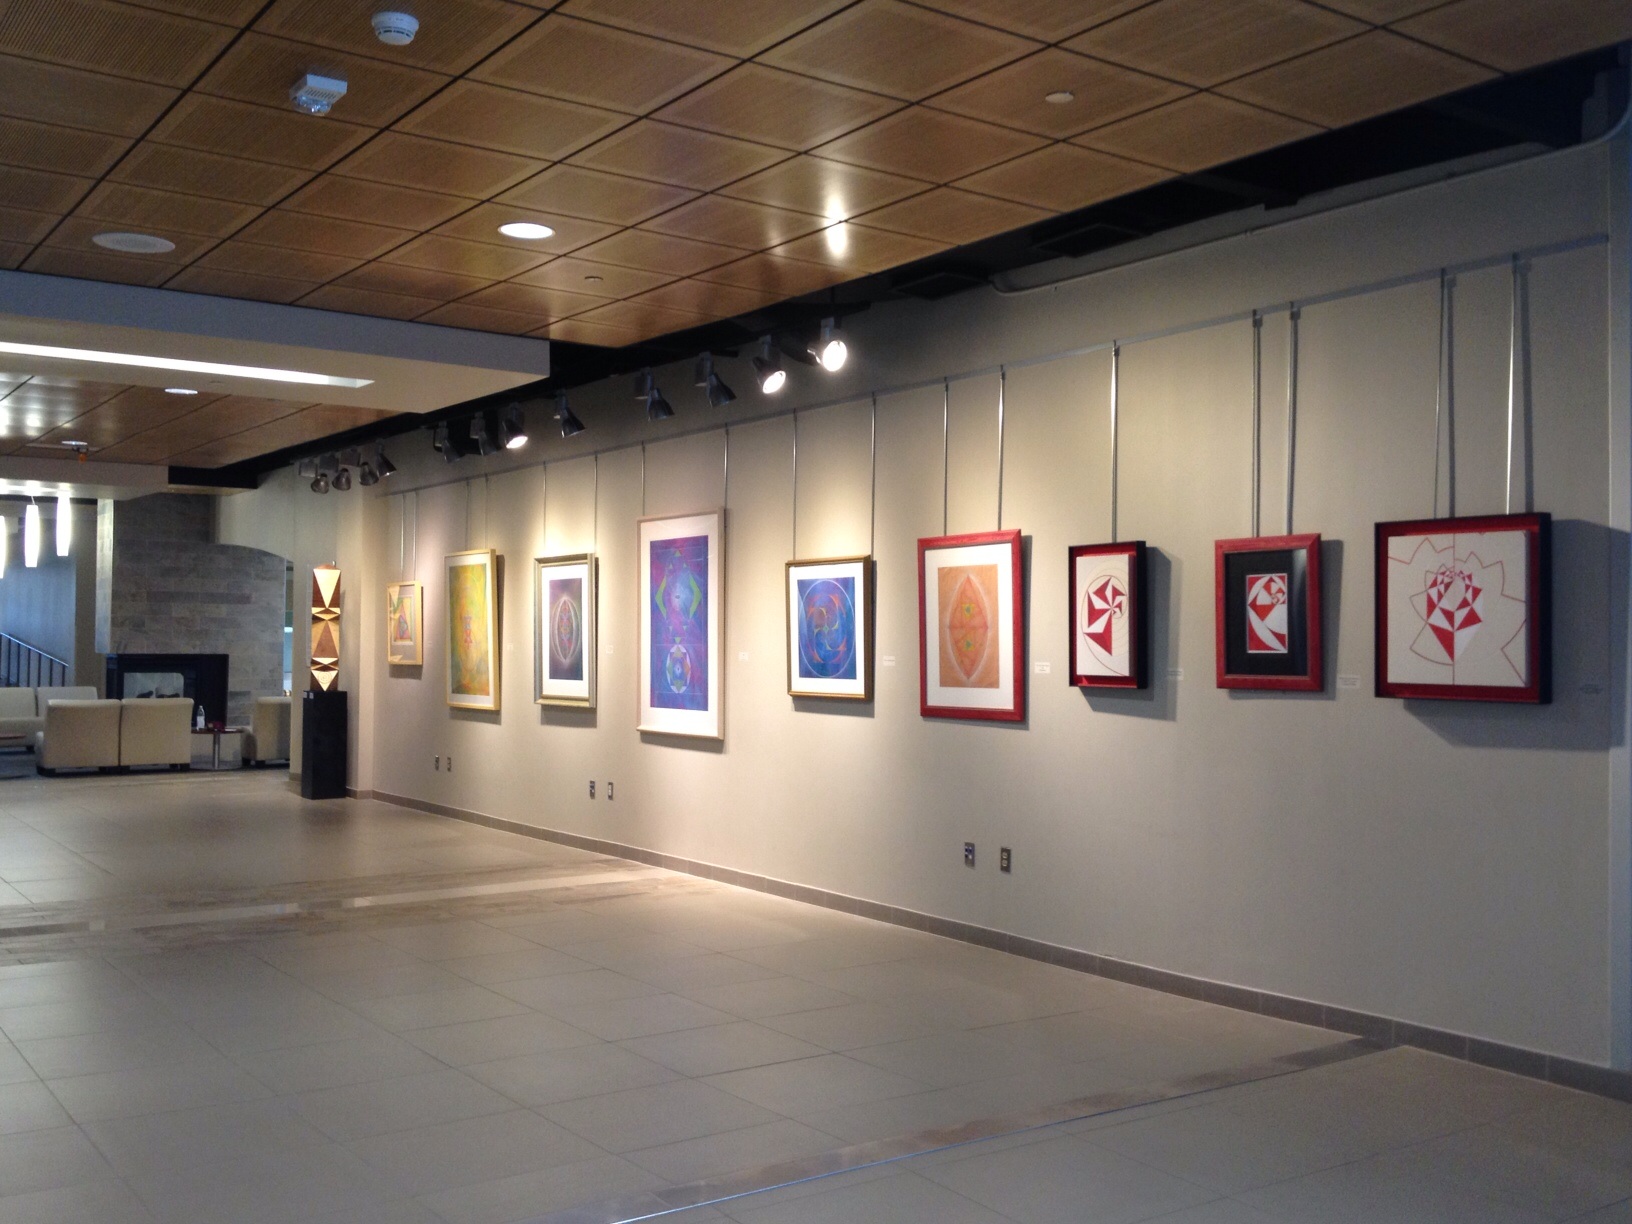 Art in the main hall of the Rudolph Jones Student Center